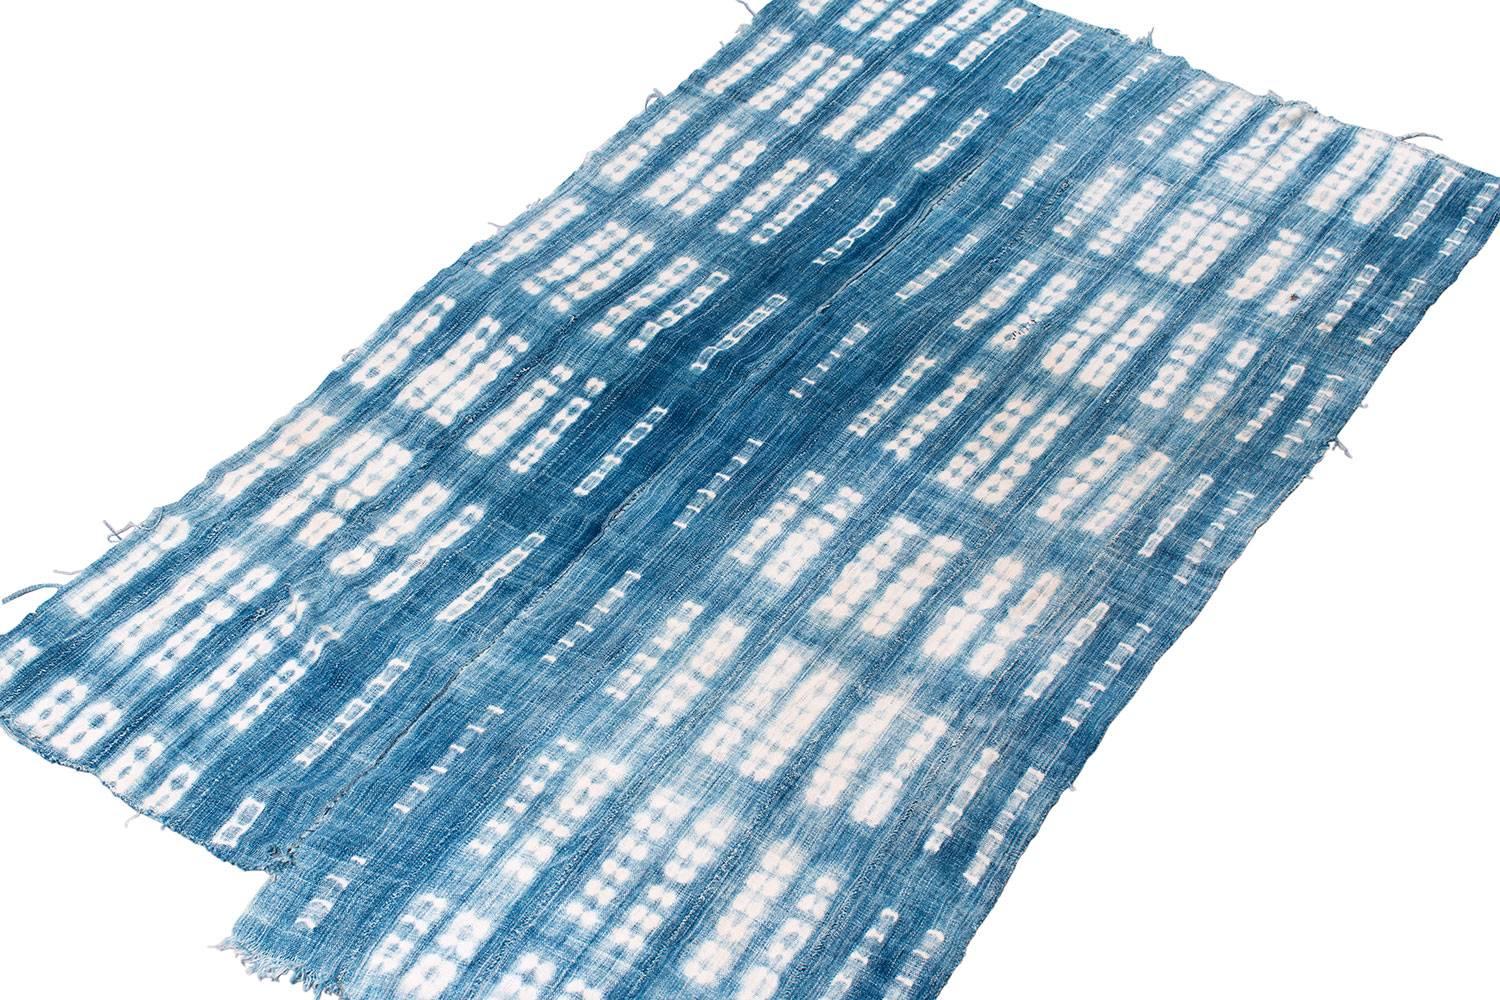 This is a beautiful indigo textile from Burkina Faso in West Africa. This piece has a great denim-like feel and look, the pattern is an indigo dye resist technique. This textile is hand-spun with soft cotton. Such a luminous and beautiful textile!